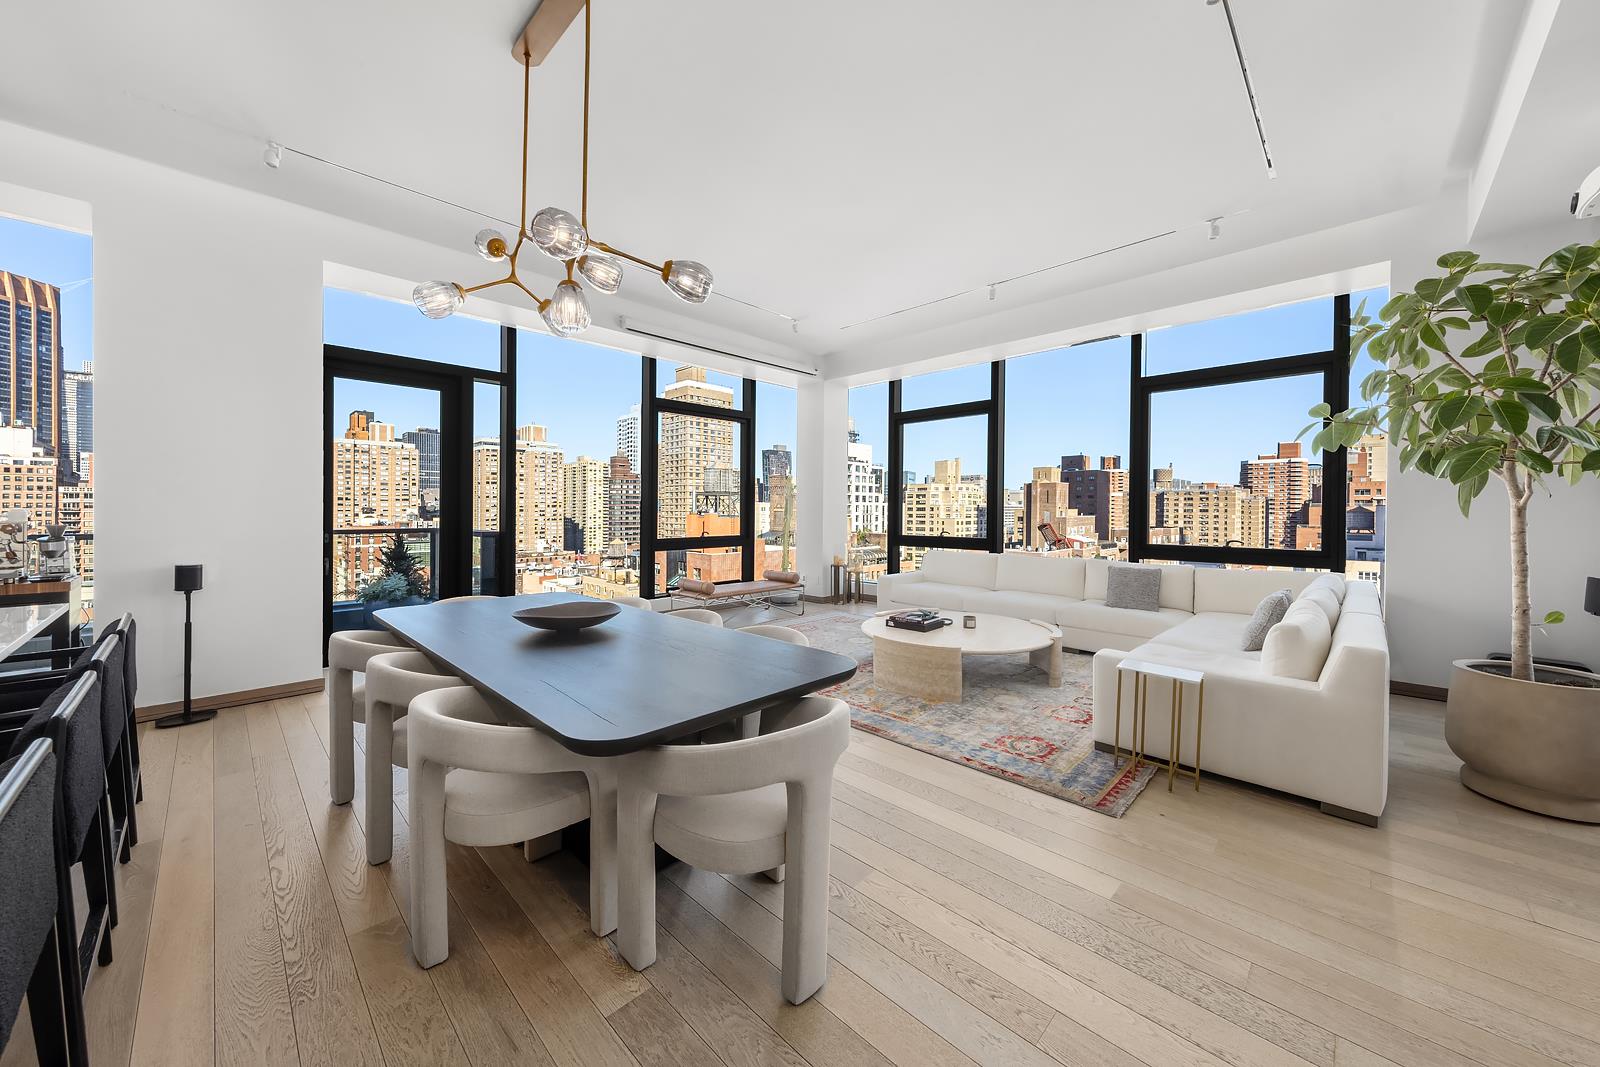 90 Lexington Avenue Pha, Nomad, Downtown, NYC - 4 Bedrooms  
4.5 Bathrooms  
8 Rooms - 